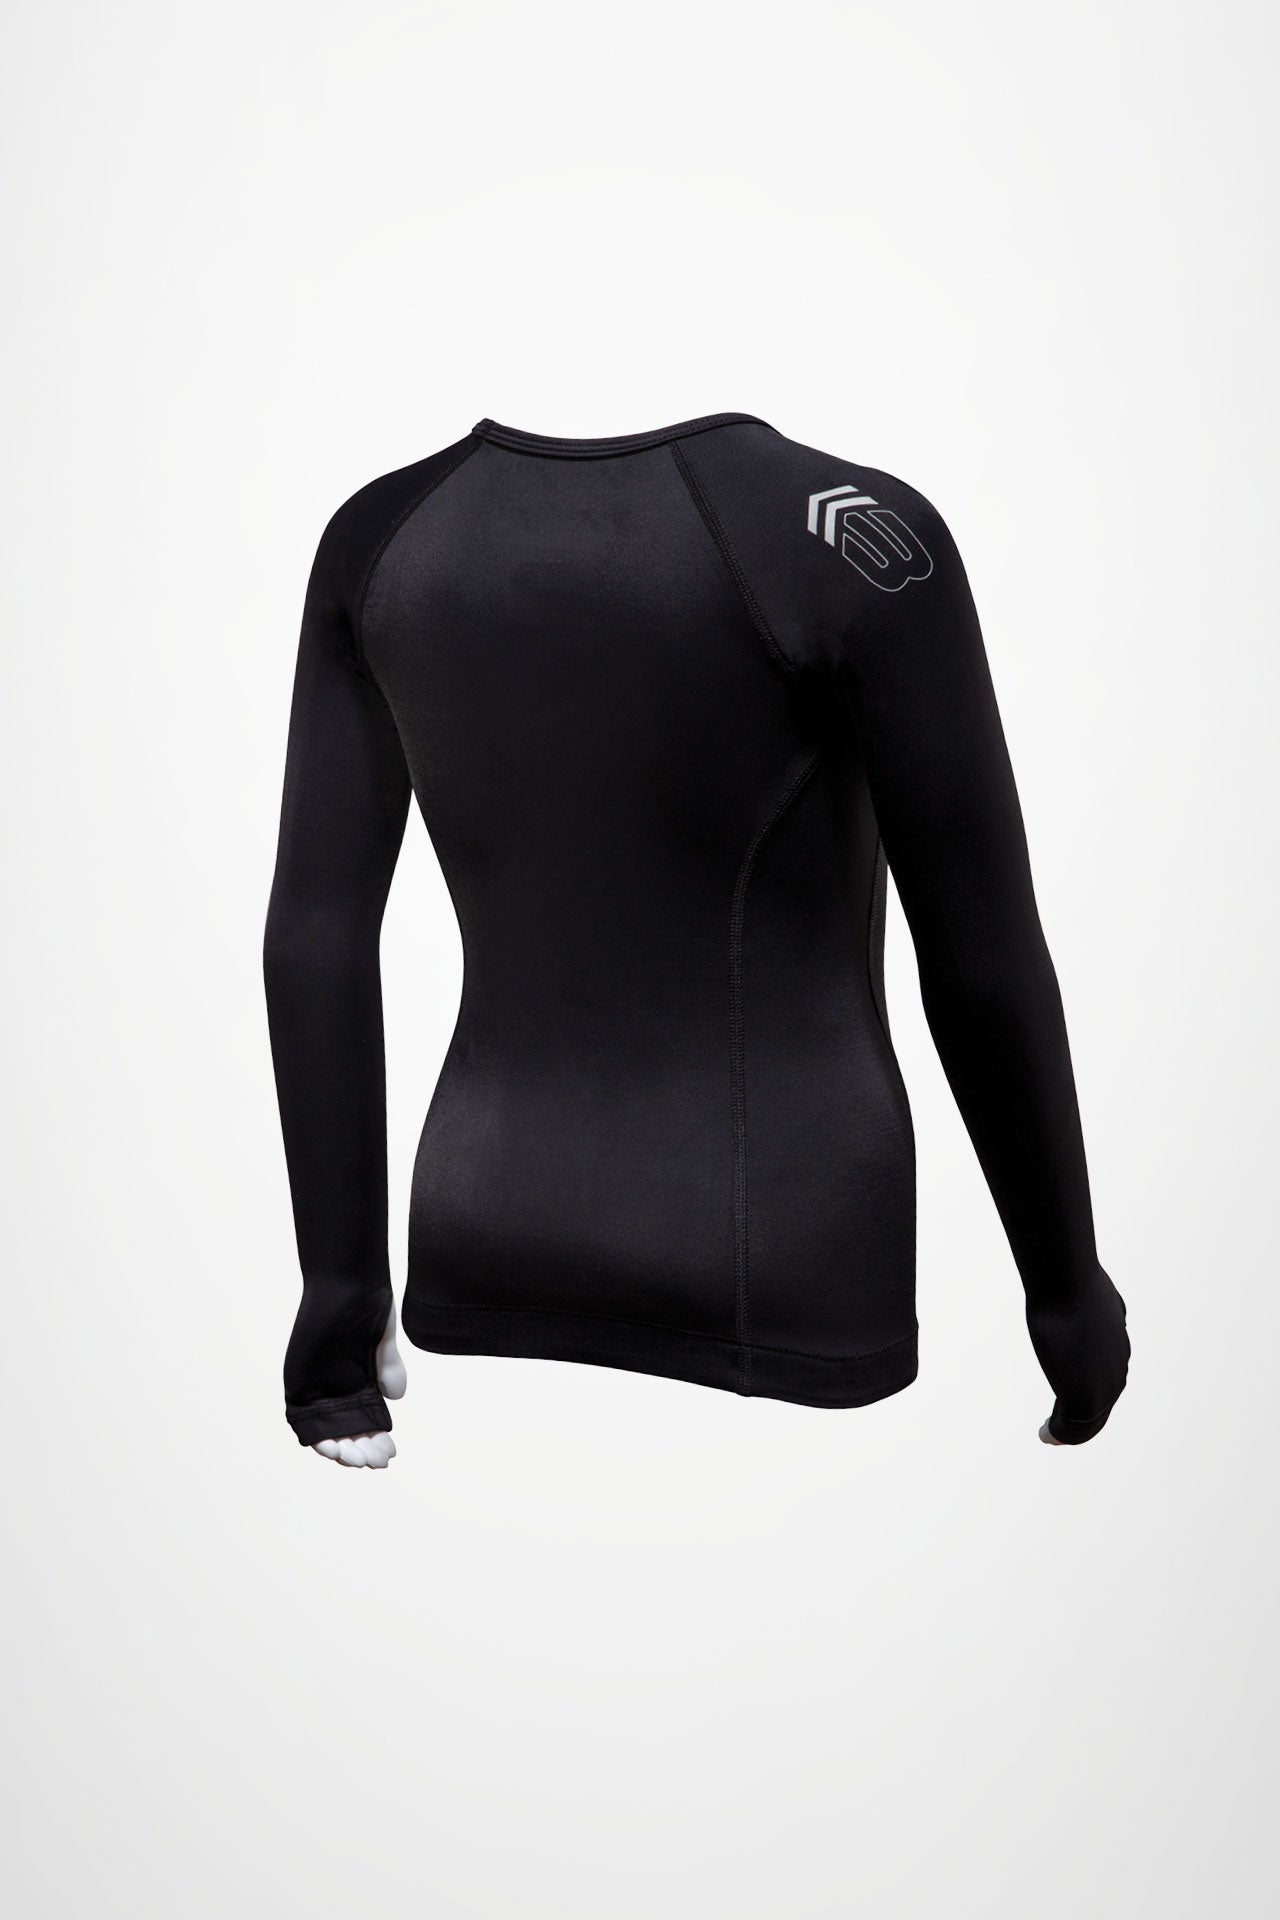 Long Sleeve Compression Tee